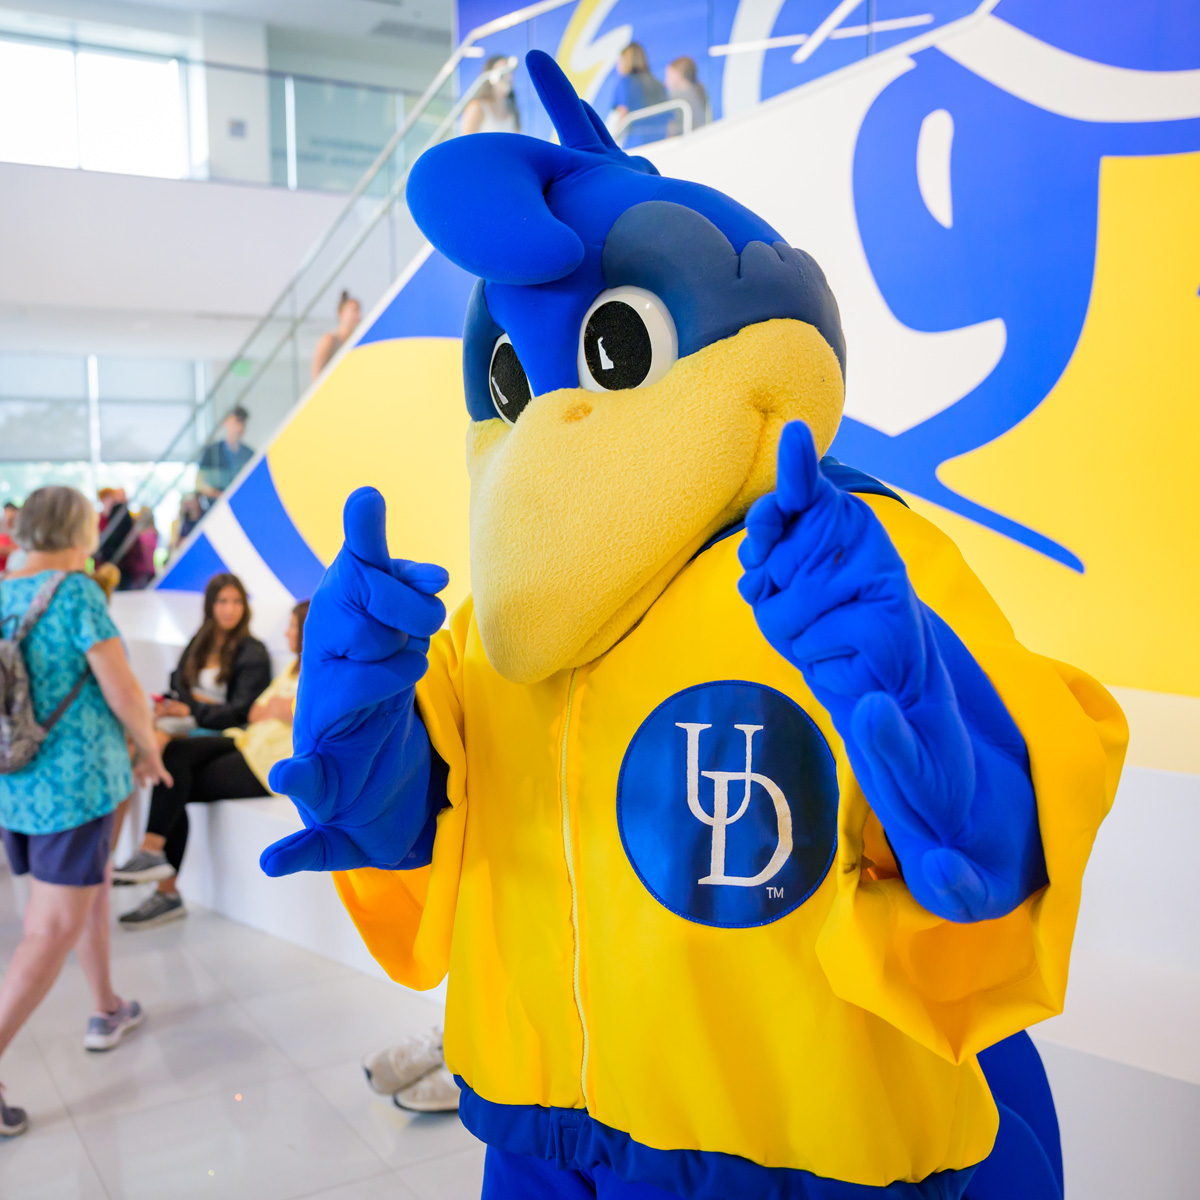 YoUDee welcomes new students to campus during Move-In.